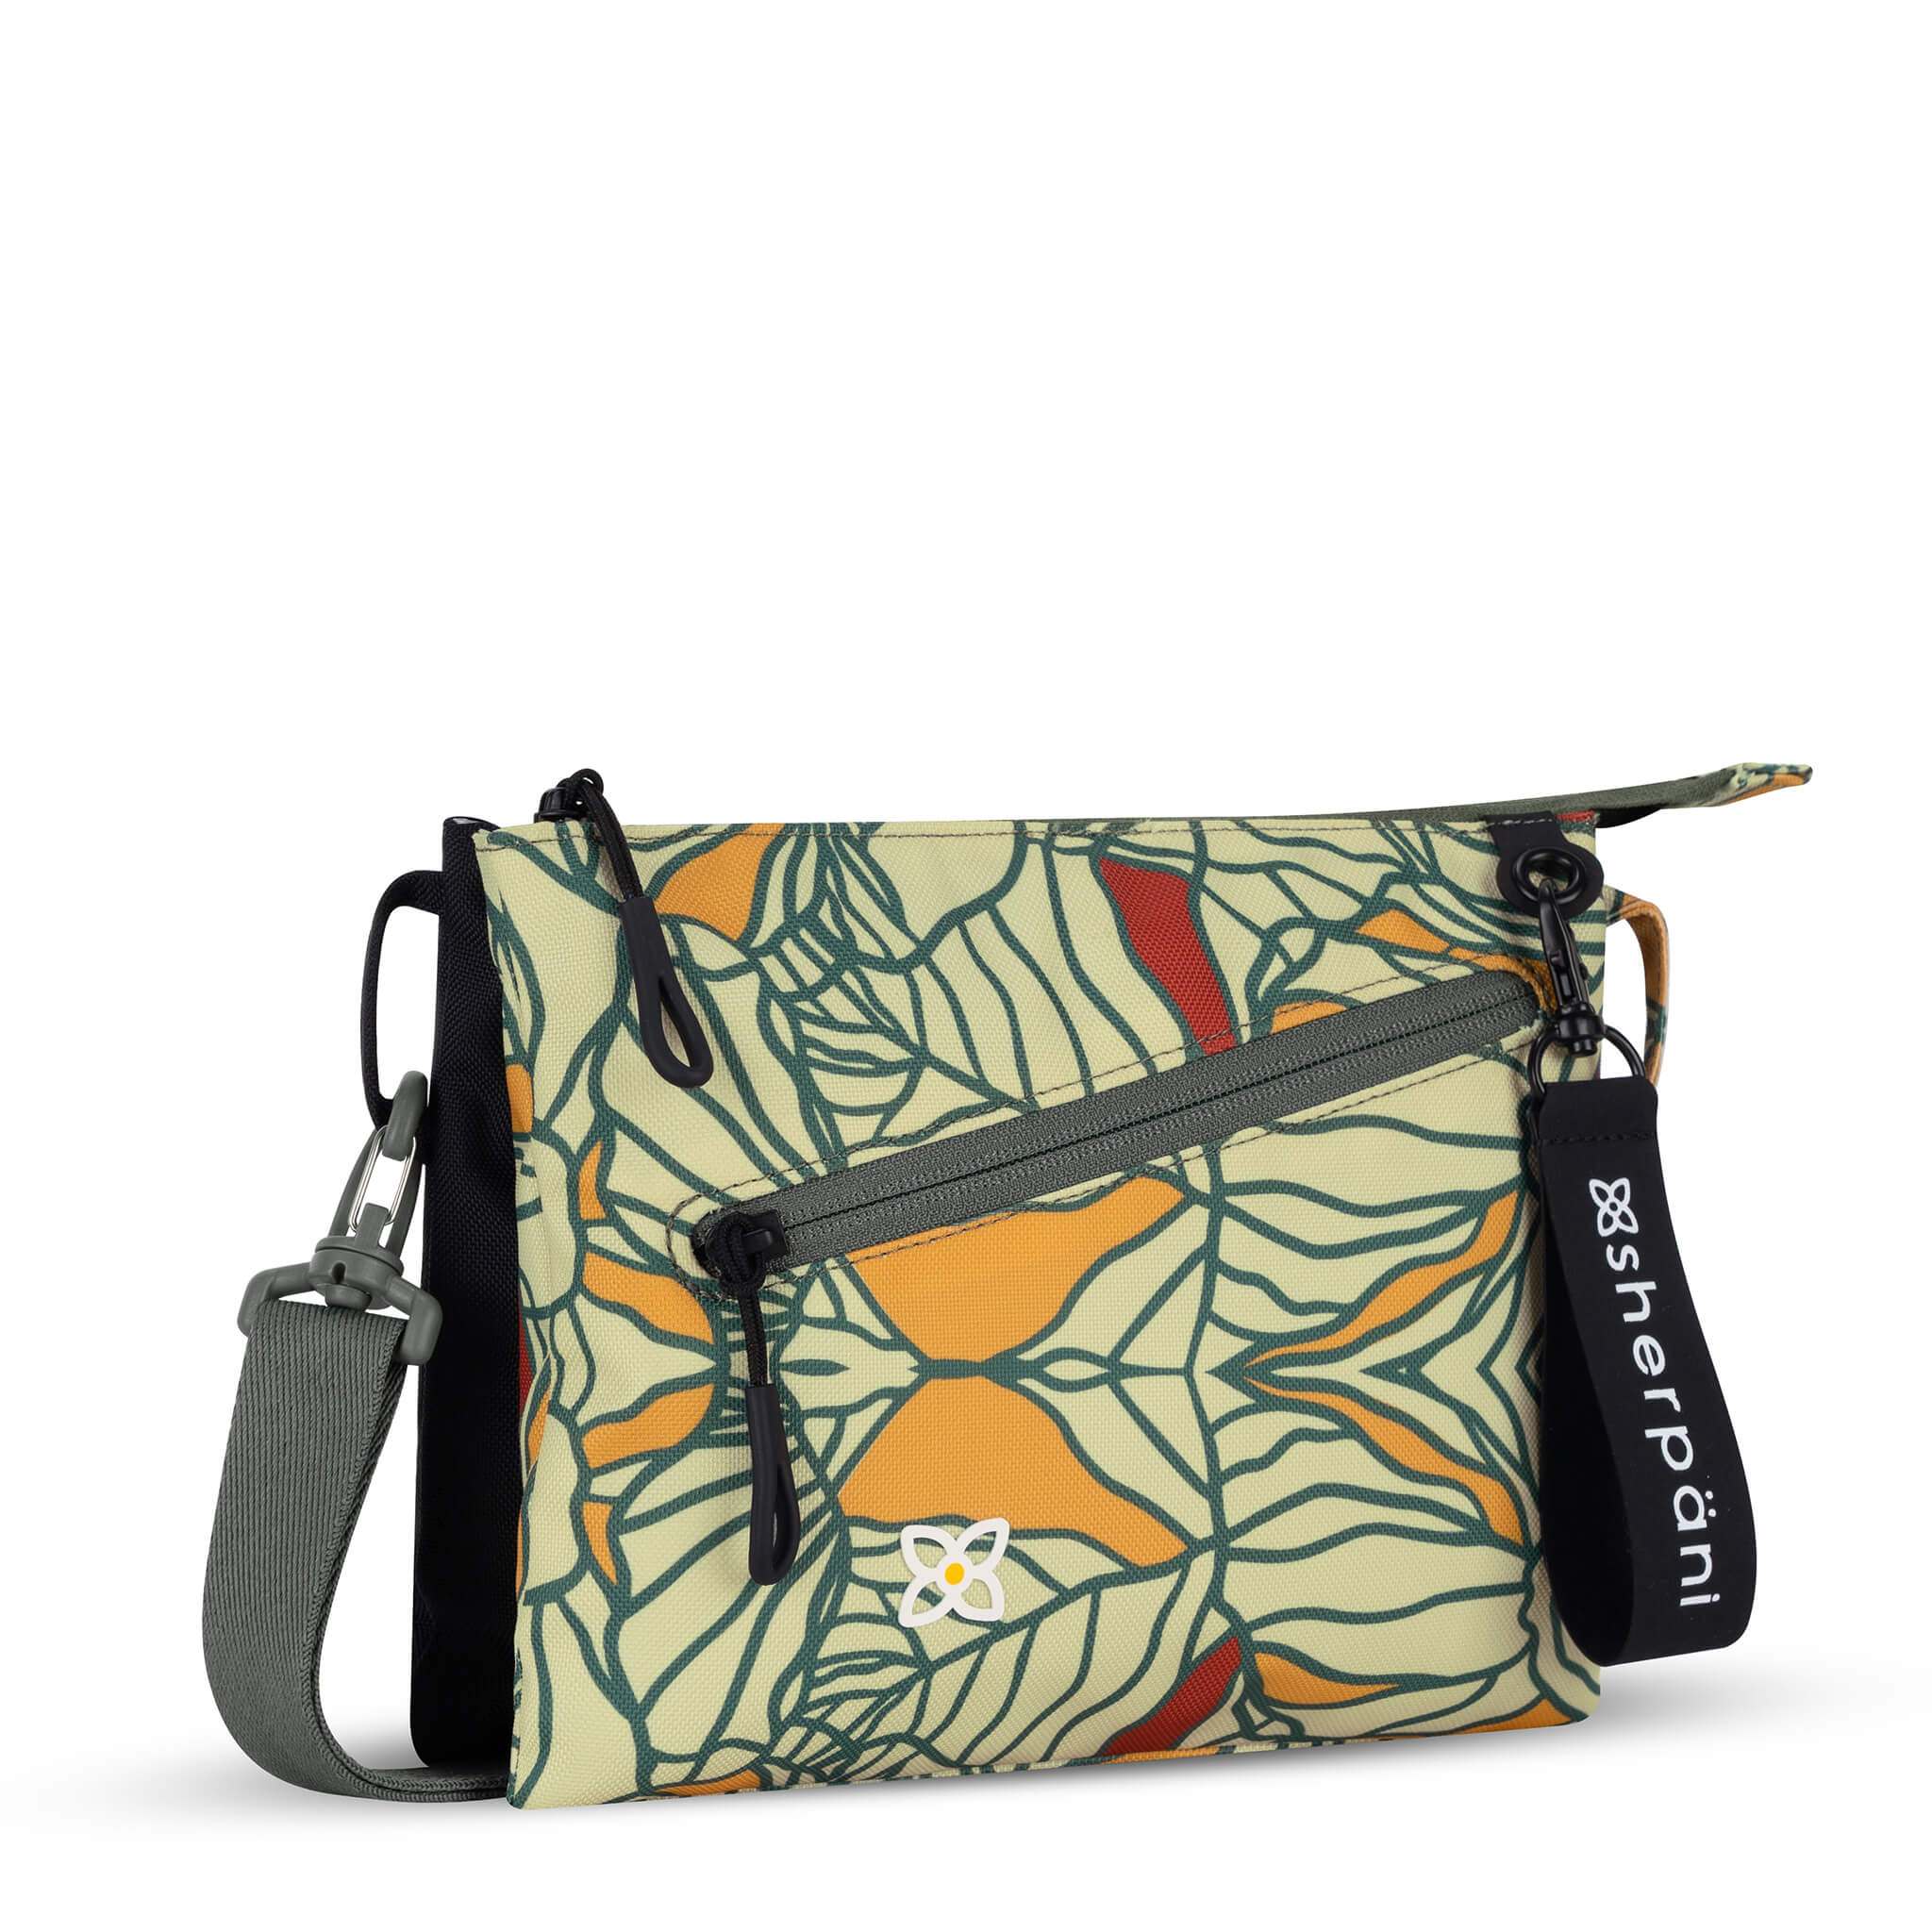 Angled front view of Sherpani small crossbody bag, the Zoom in Fiori. Special features of the Zoom include RFID protection, adjustable crossbody strap, removable strap, removable keychain, outside zipper pocket, internal divider, internal zipper pockets and back slip pocket. The Fiori colorway is two-toned in black and a floral pattern with a neutral color palette. #color_fiori